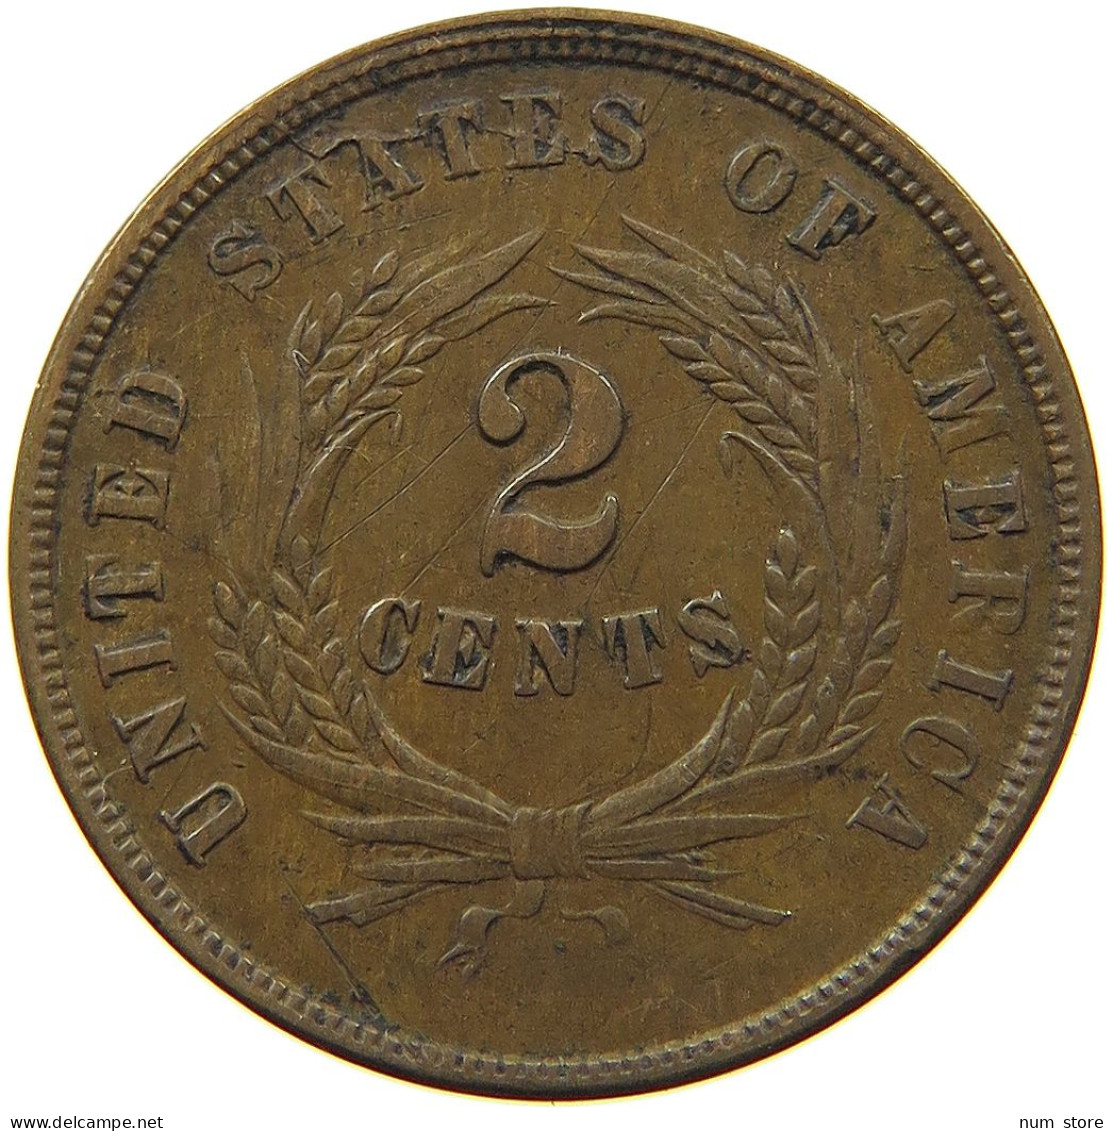 UNITED STATES OF AMERICA 2 CENTS 1864 WEAK STRUCK 1864 #t116 1017 - 2, 3 & 20 Cents